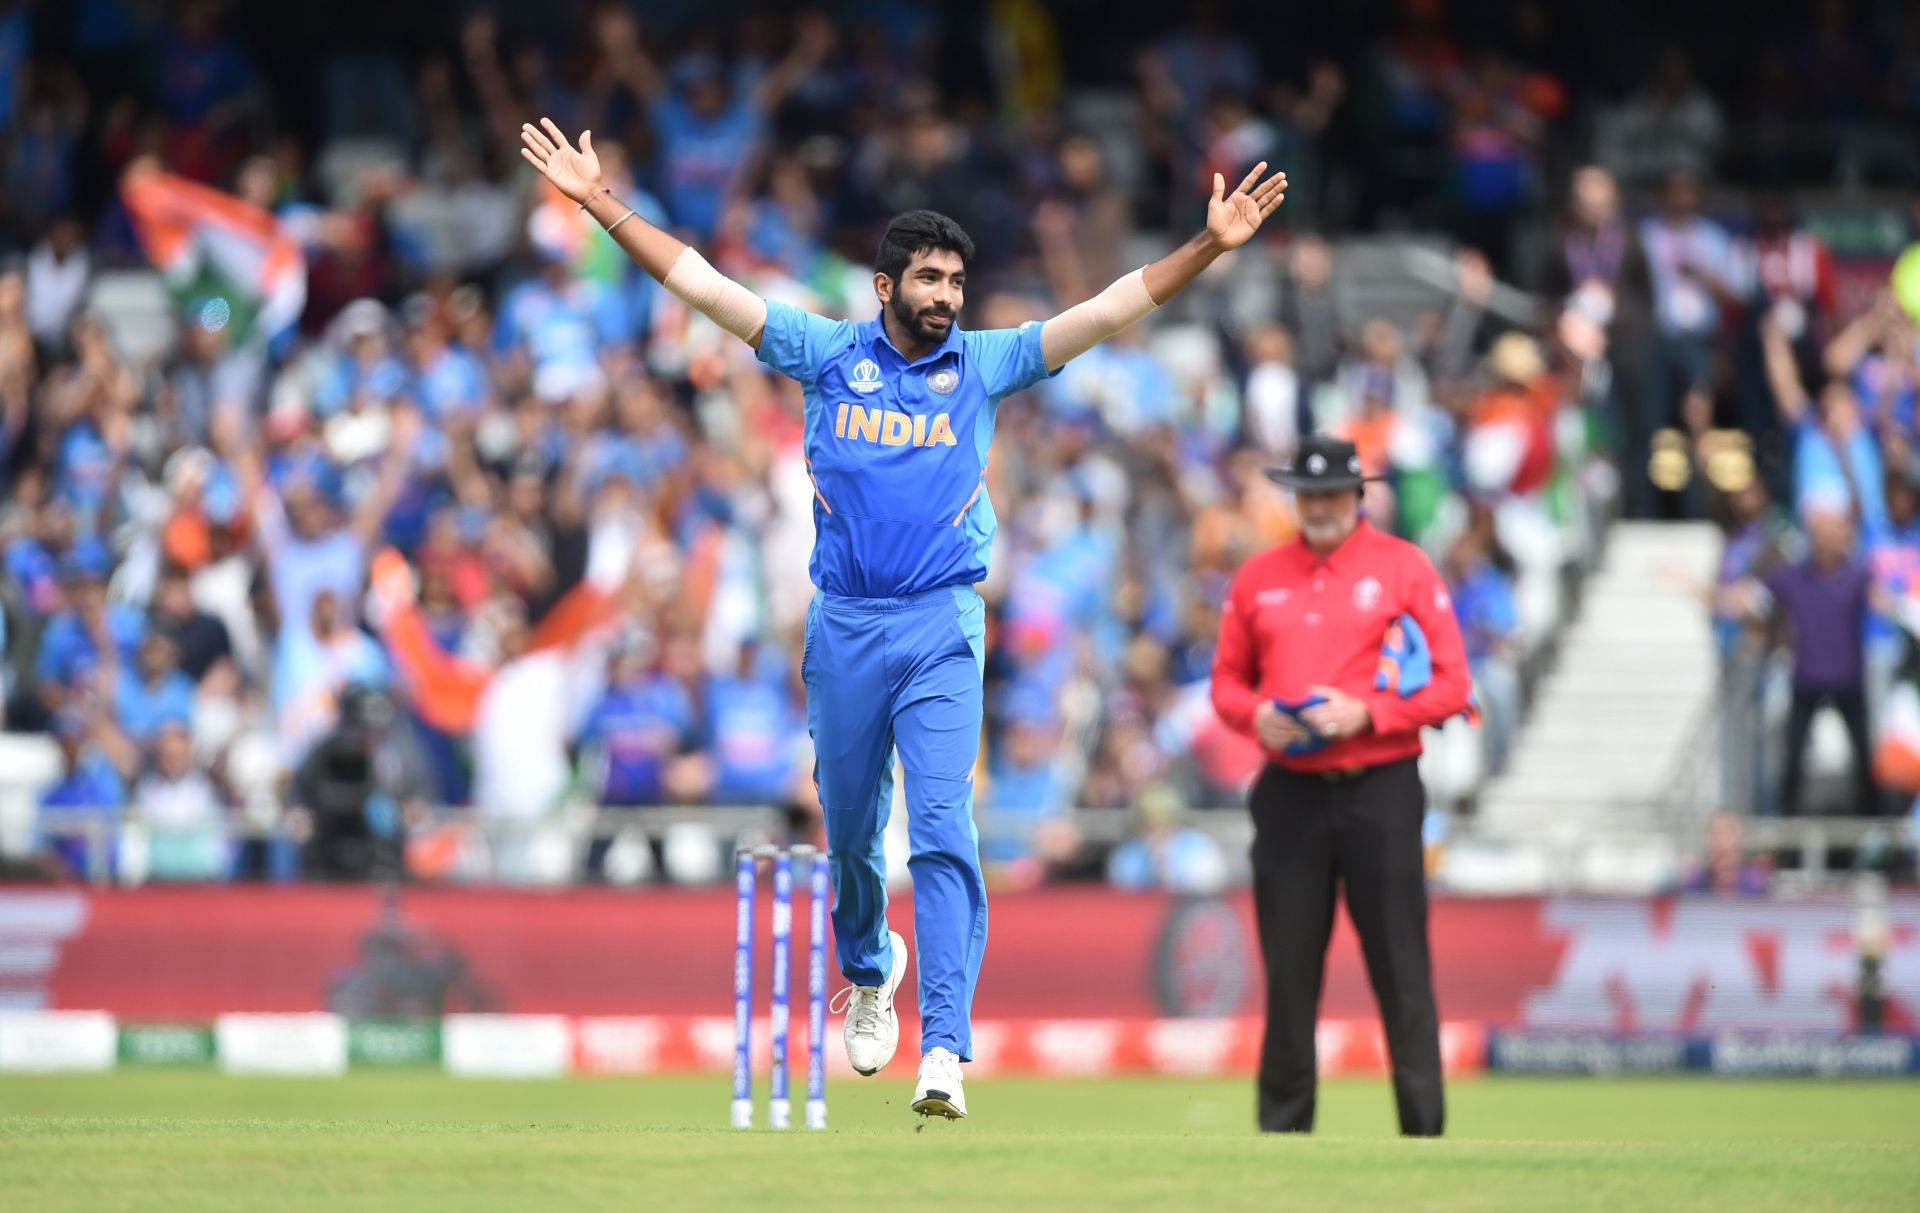 Jasprit Bumrah can change his pace superbly